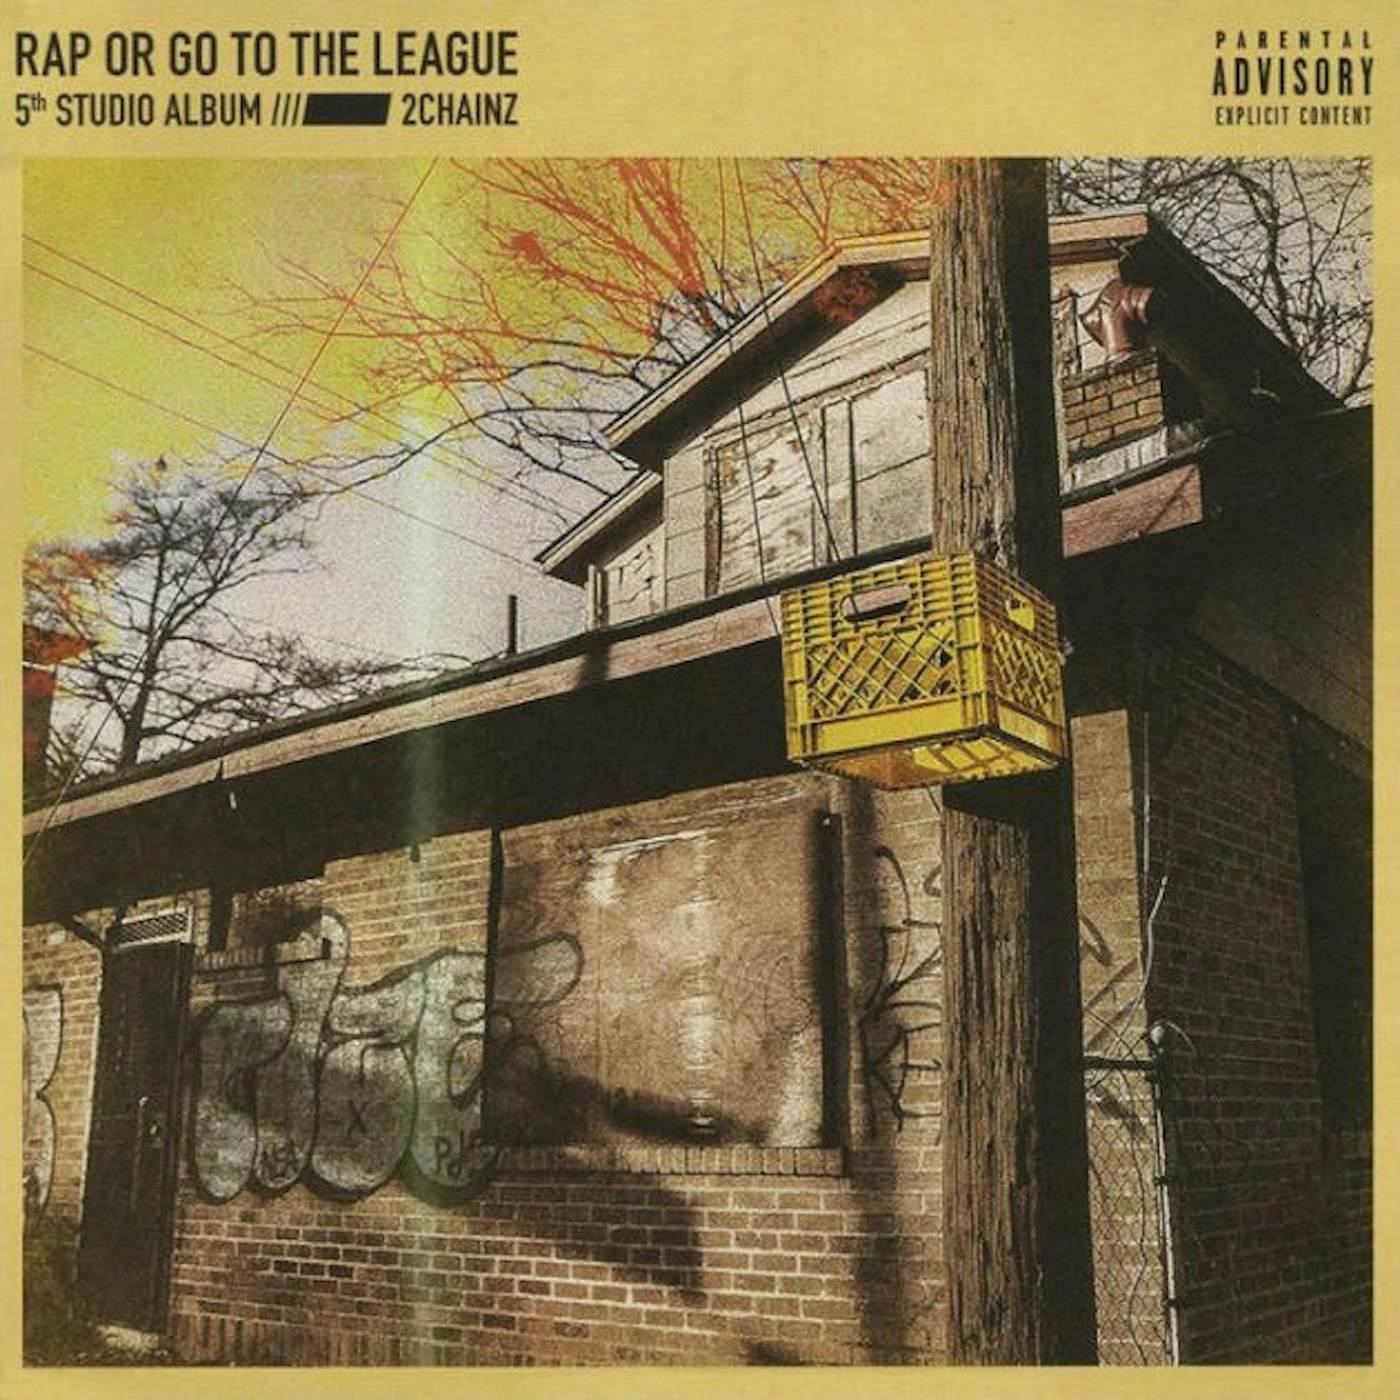 2 Chainz RAP OR GO TO THE LEAGUE CD